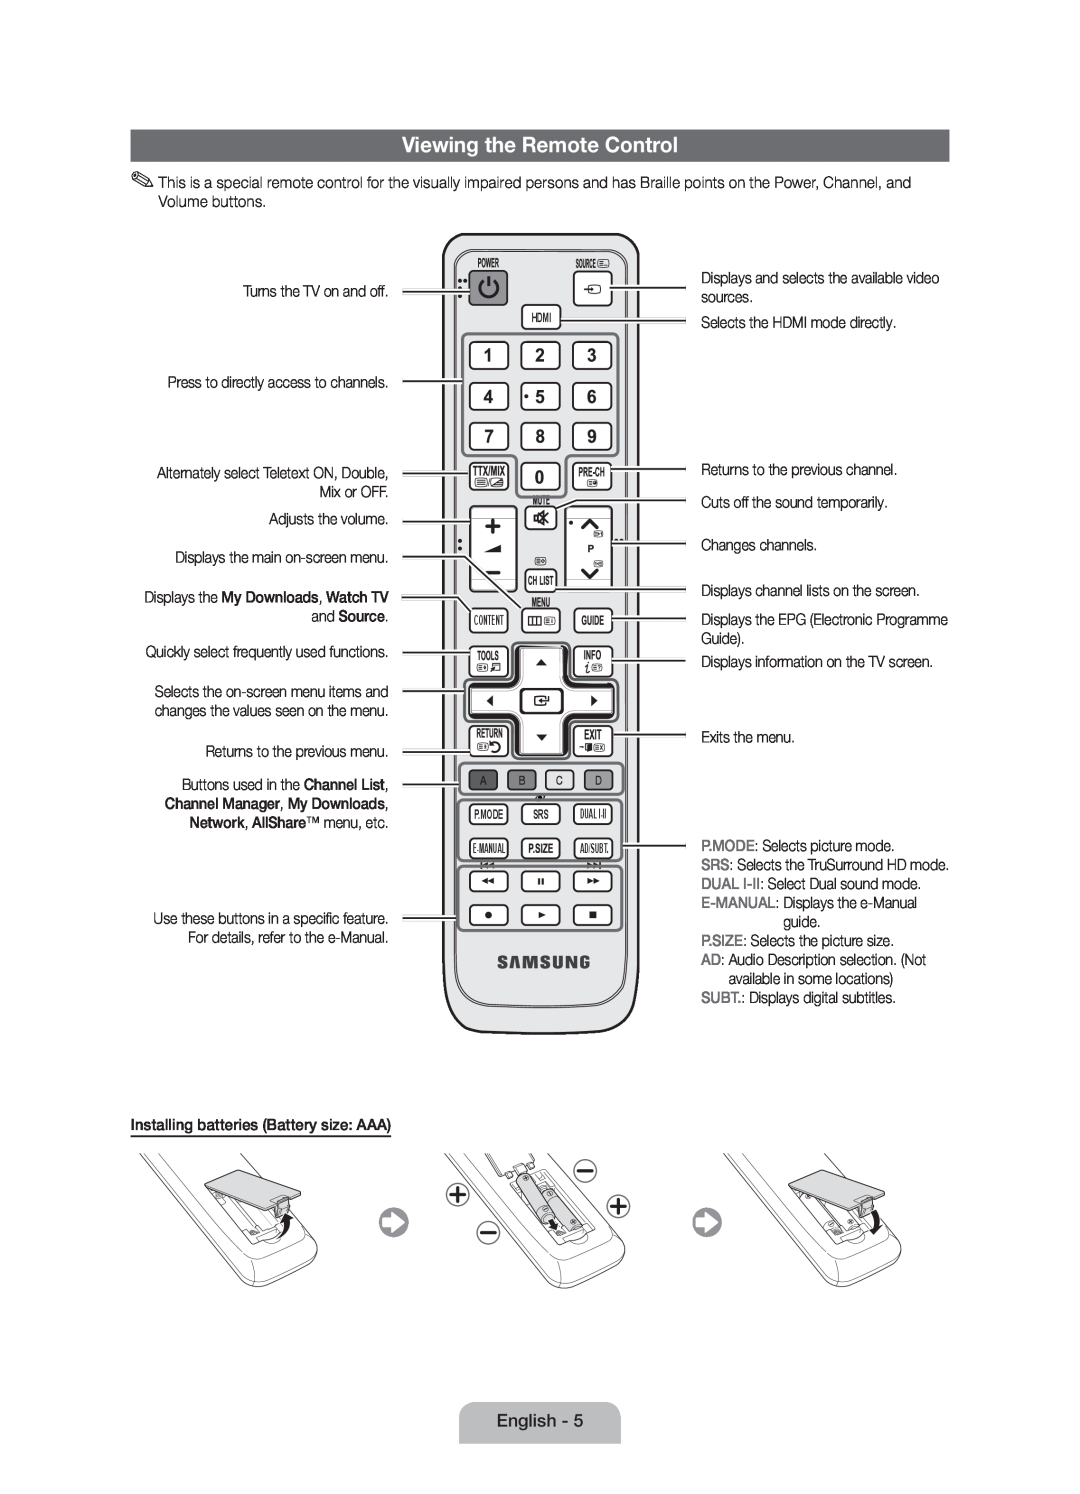 Samsung UE46D5000PWXXH, UE46D5000PWXZG, UE40D5000PWXXH, UE40D5000PWXXC, UE32D5000PWXXC manual Viewing the Remote Control 